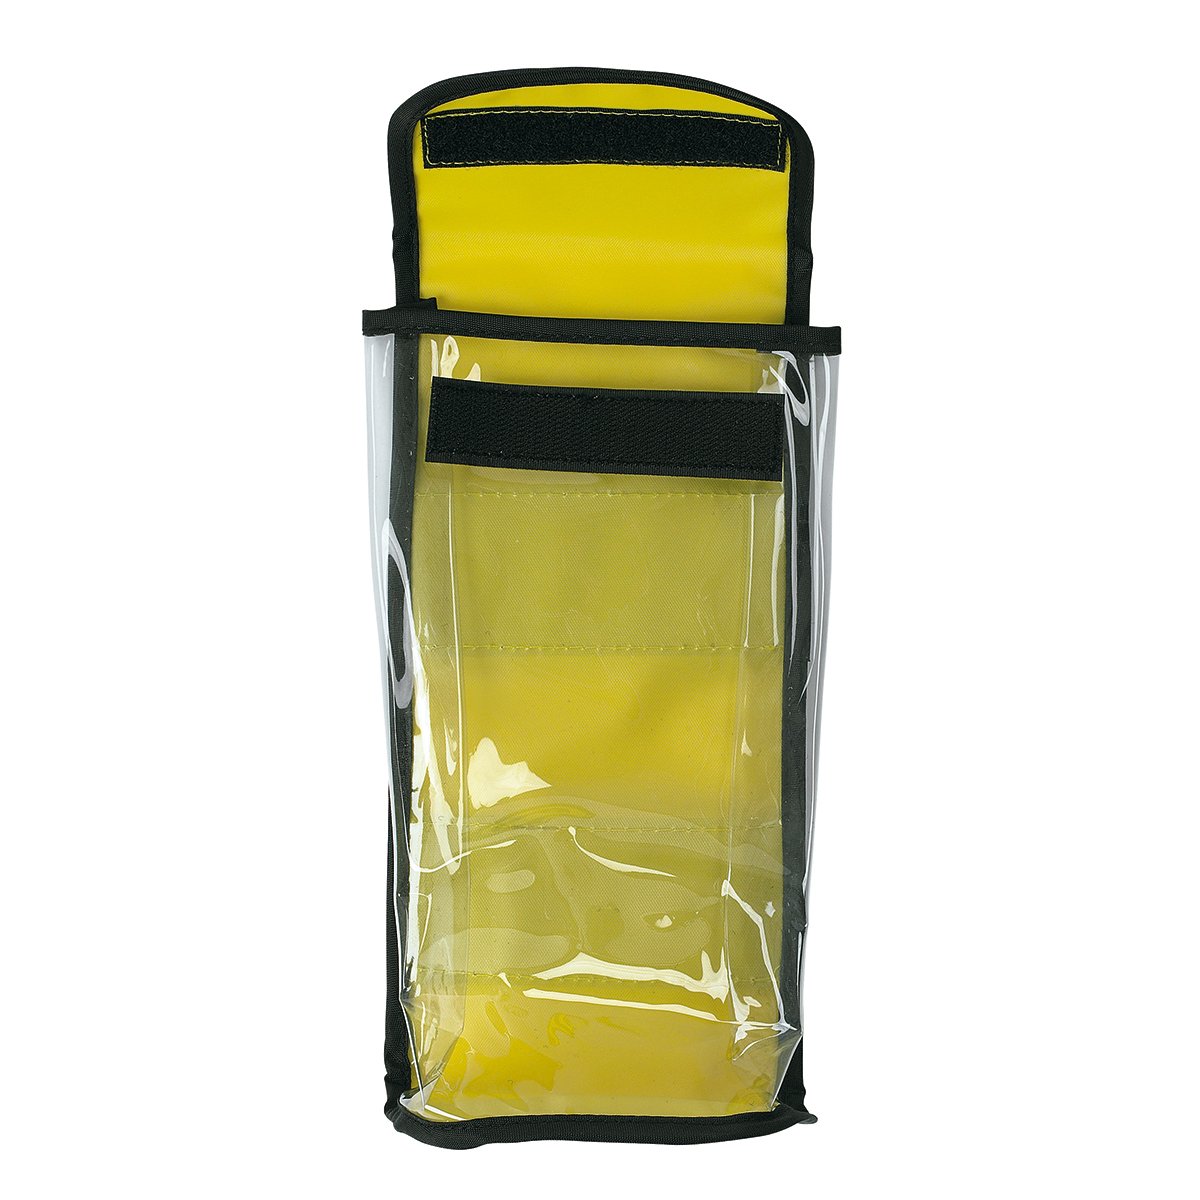 Yellow B Pouch for St John Ambulance Backpack